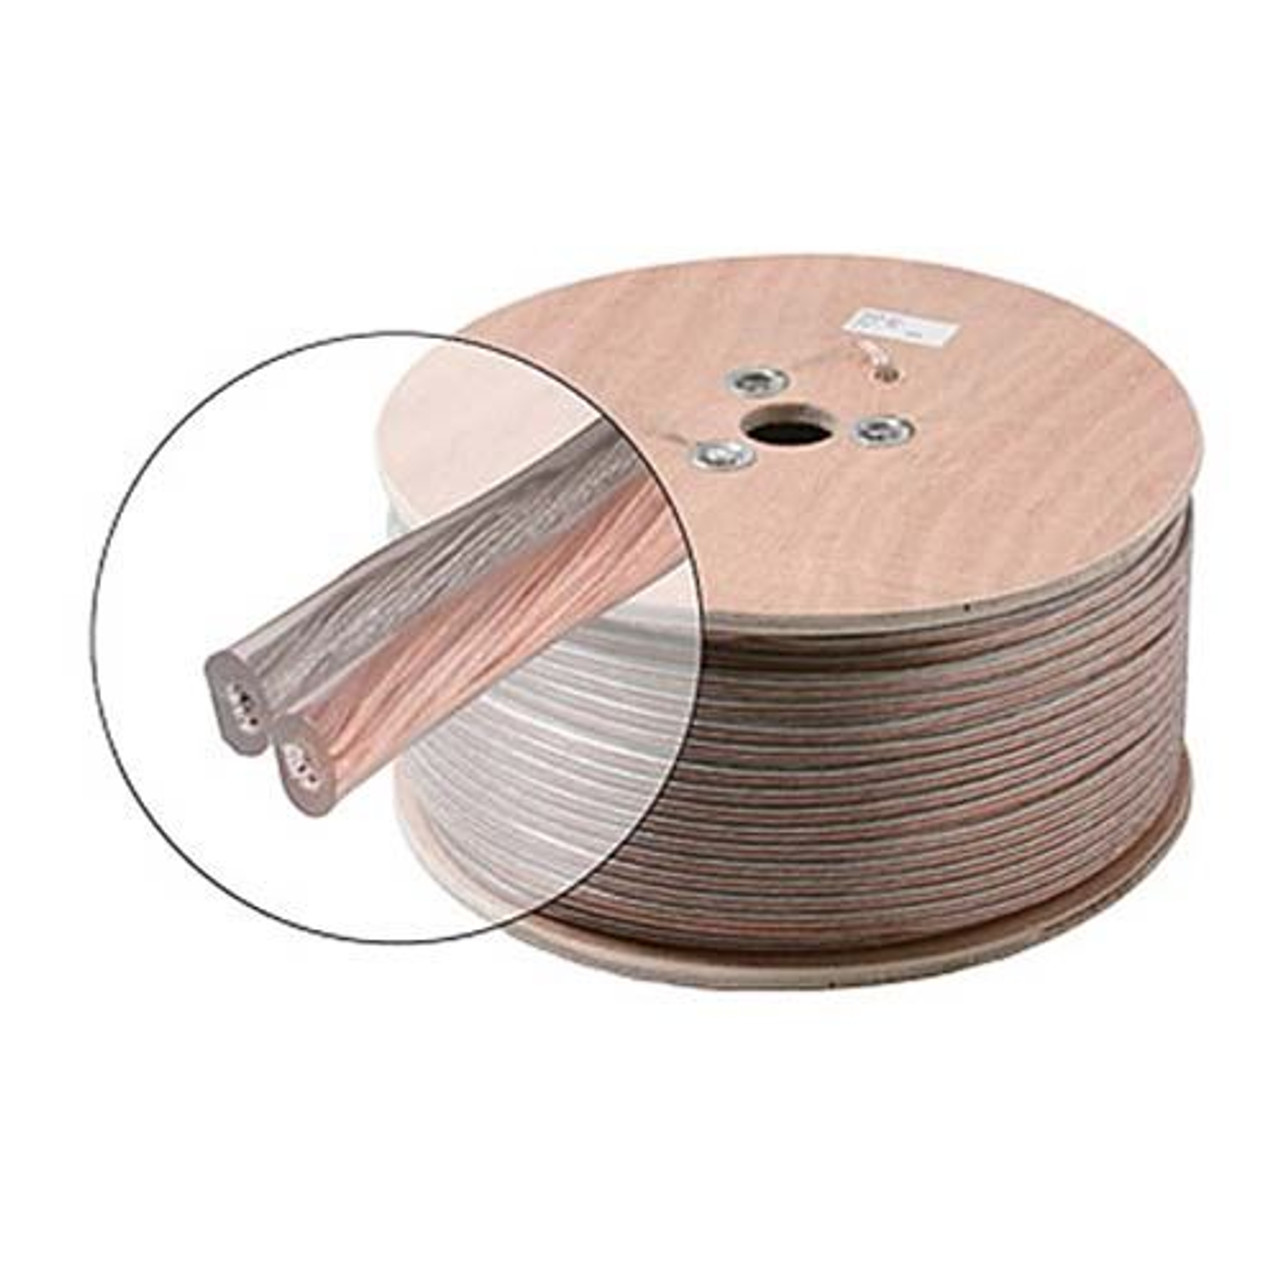 Steren 255-319CL 1000' FT 18 AWG Ga 2 Conductor Speaker Wire Oxygen Free Pure Copper Clear Jacket Audio Speaker Cable Spool Stranded Flexible Copper Conductor 18/2 Audio Speaker Cable Polarized 2-Wire Spool 18 Gauge 2 Conductor